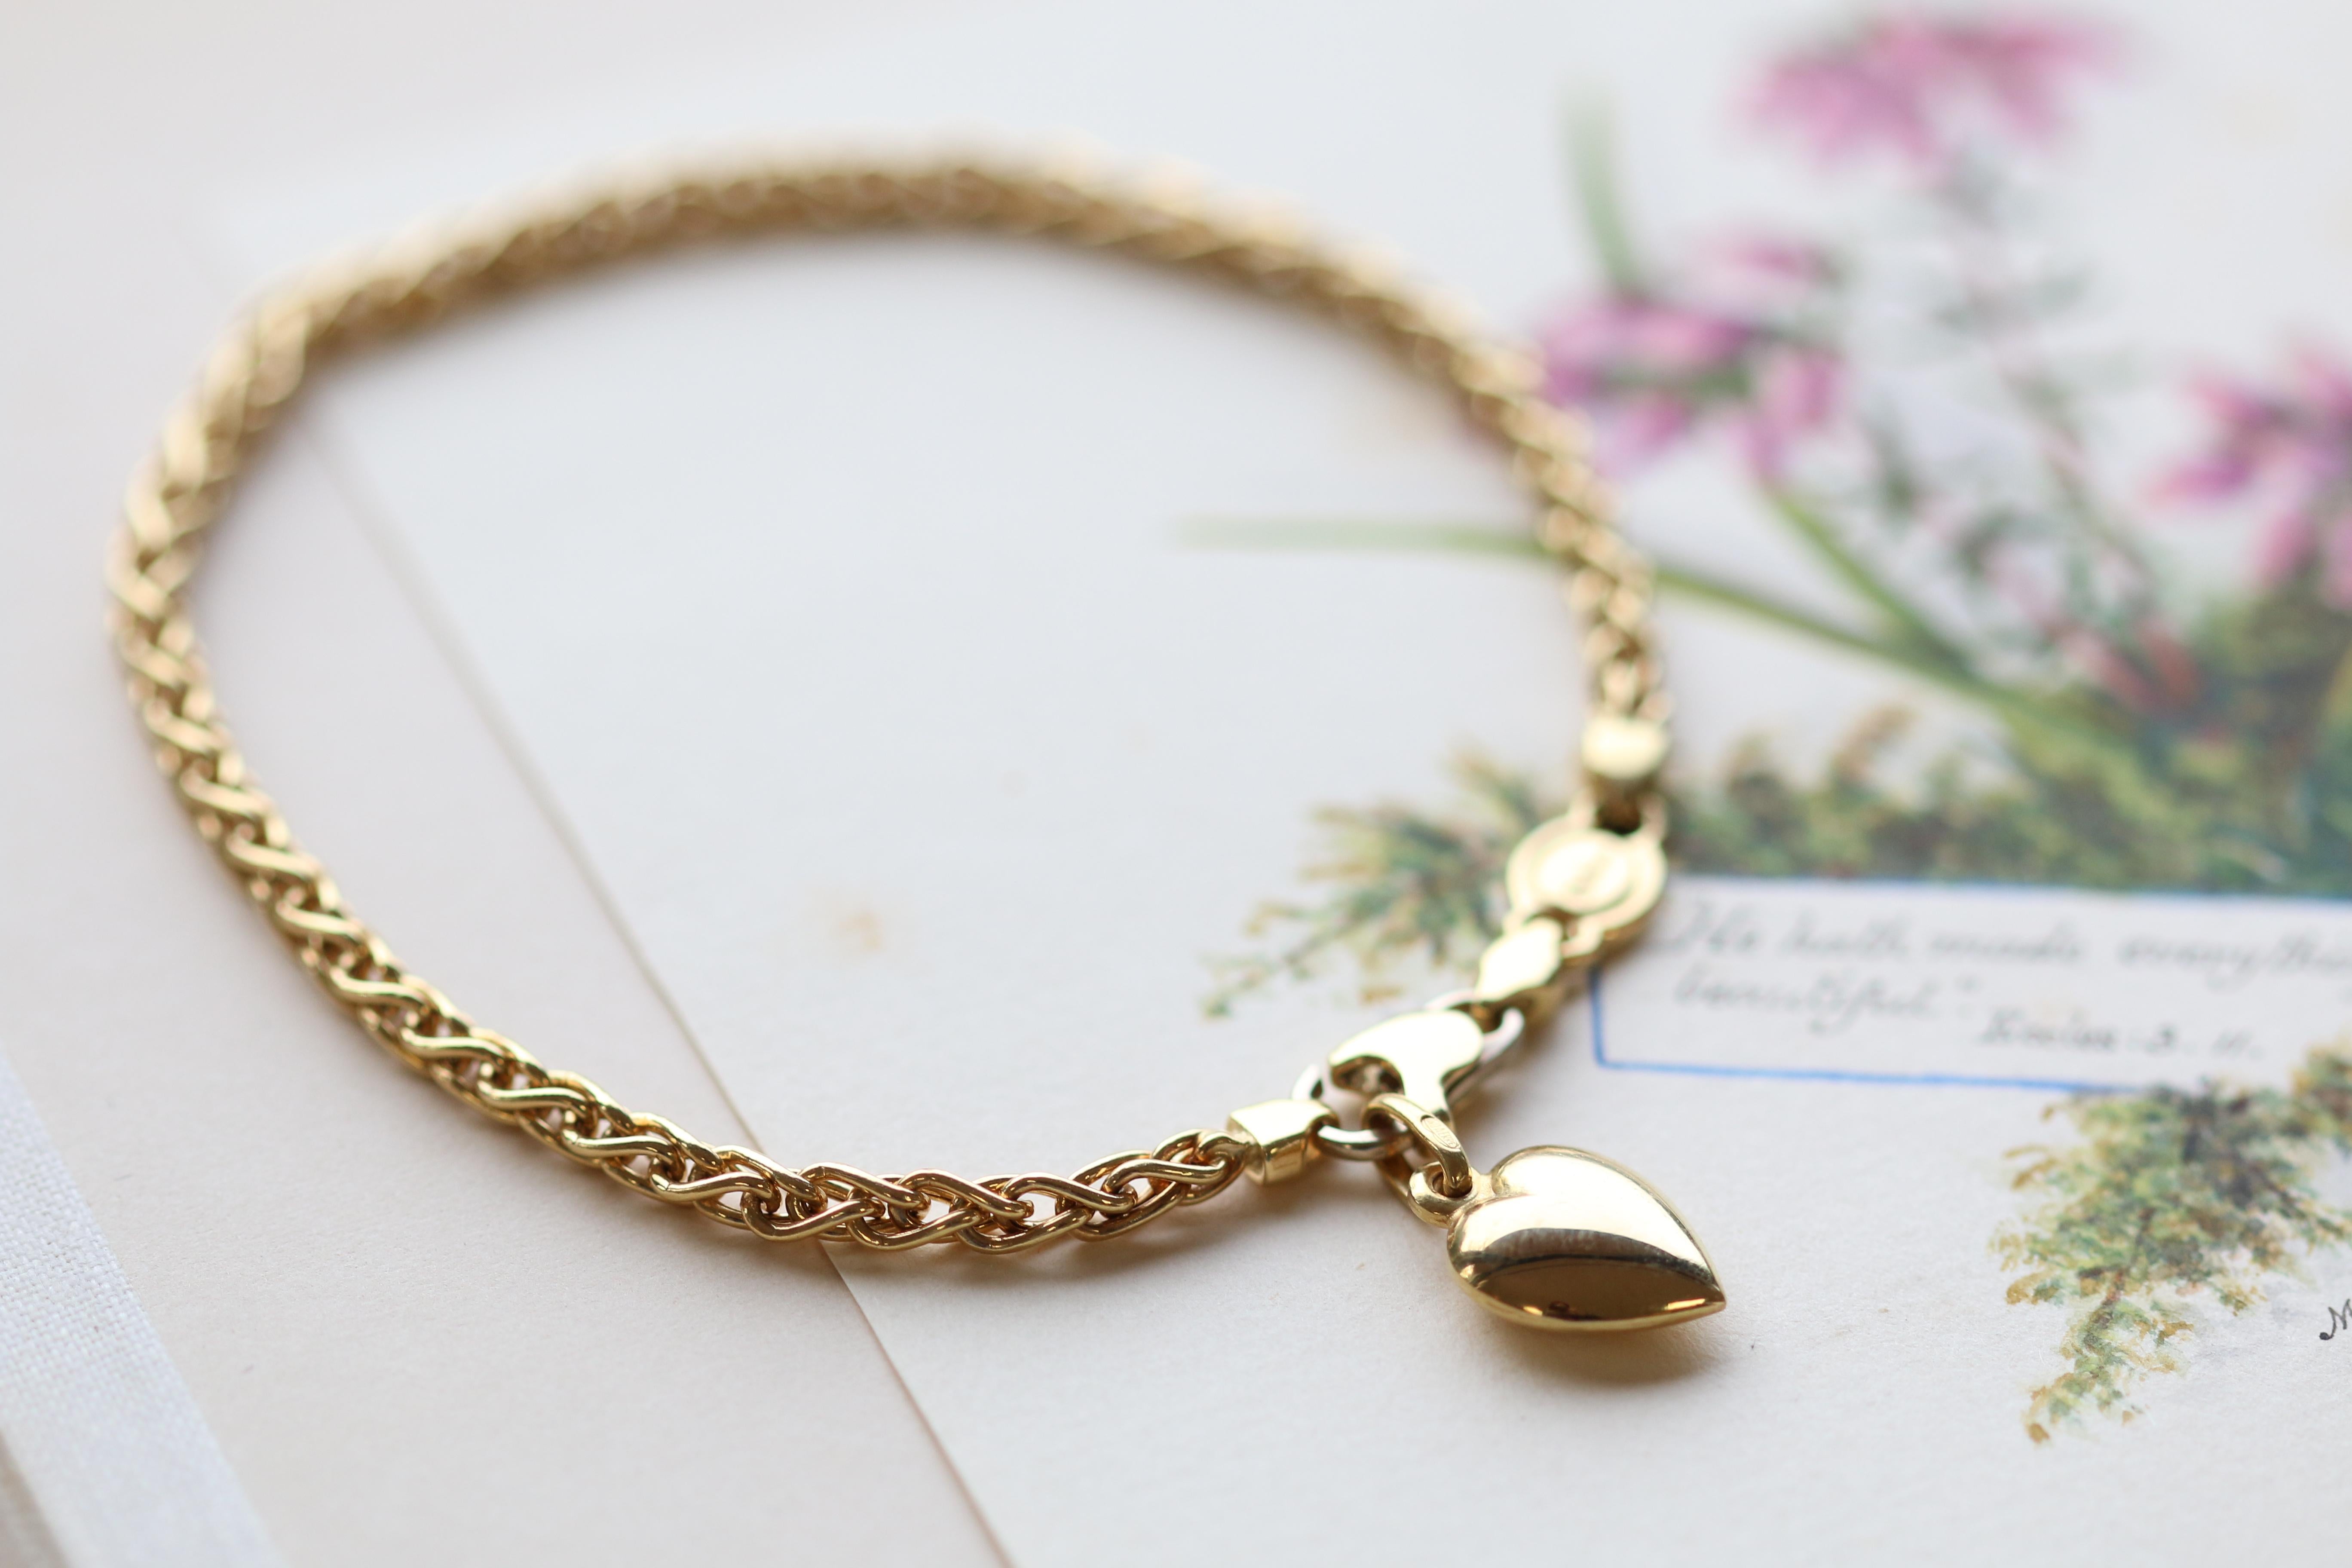 A sweet, and simply stunning 18K gold bracelet. A delicate heart pendant hangs on the clasp. Therefore giving the bracelet added style. It hangs effortlessly on the bracelet providing it with both graceful beauty and added movement. The warm glow of